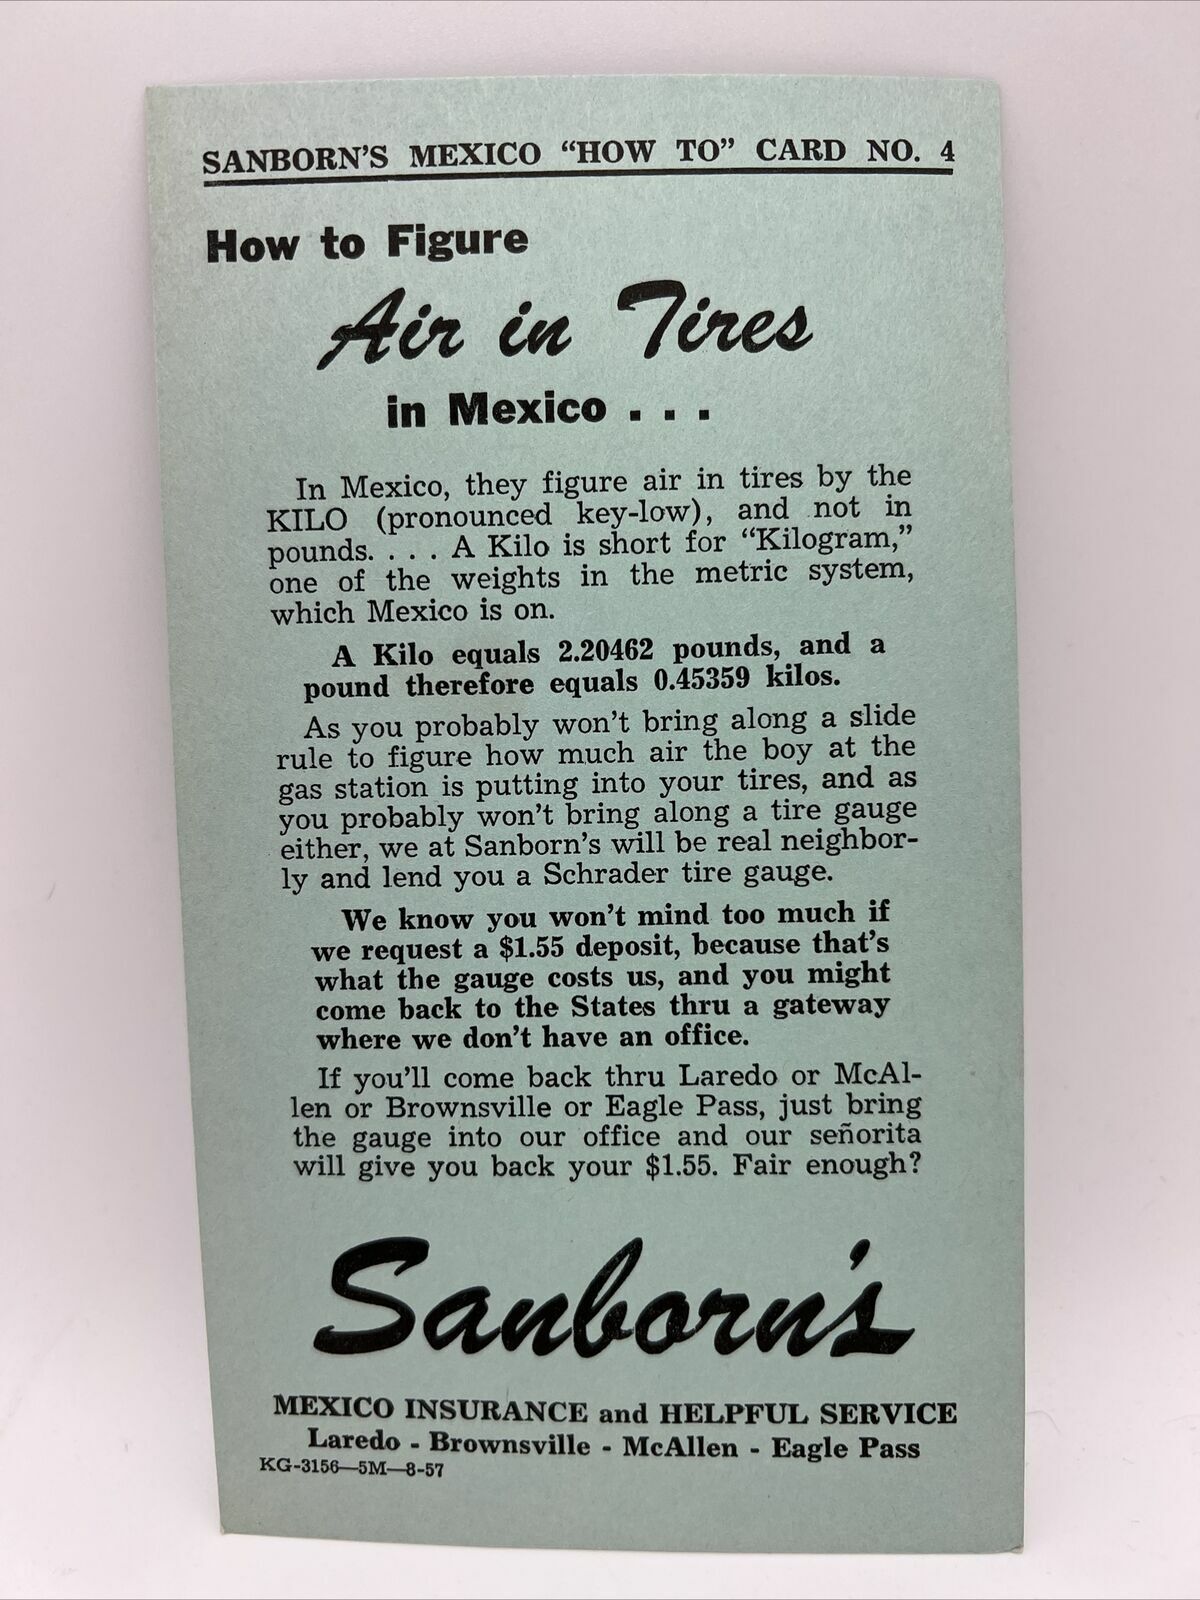 1957 AIR IN TIRES IN MEXICO Sanborn's Laredo Brownsville Texas Travel Guide Card